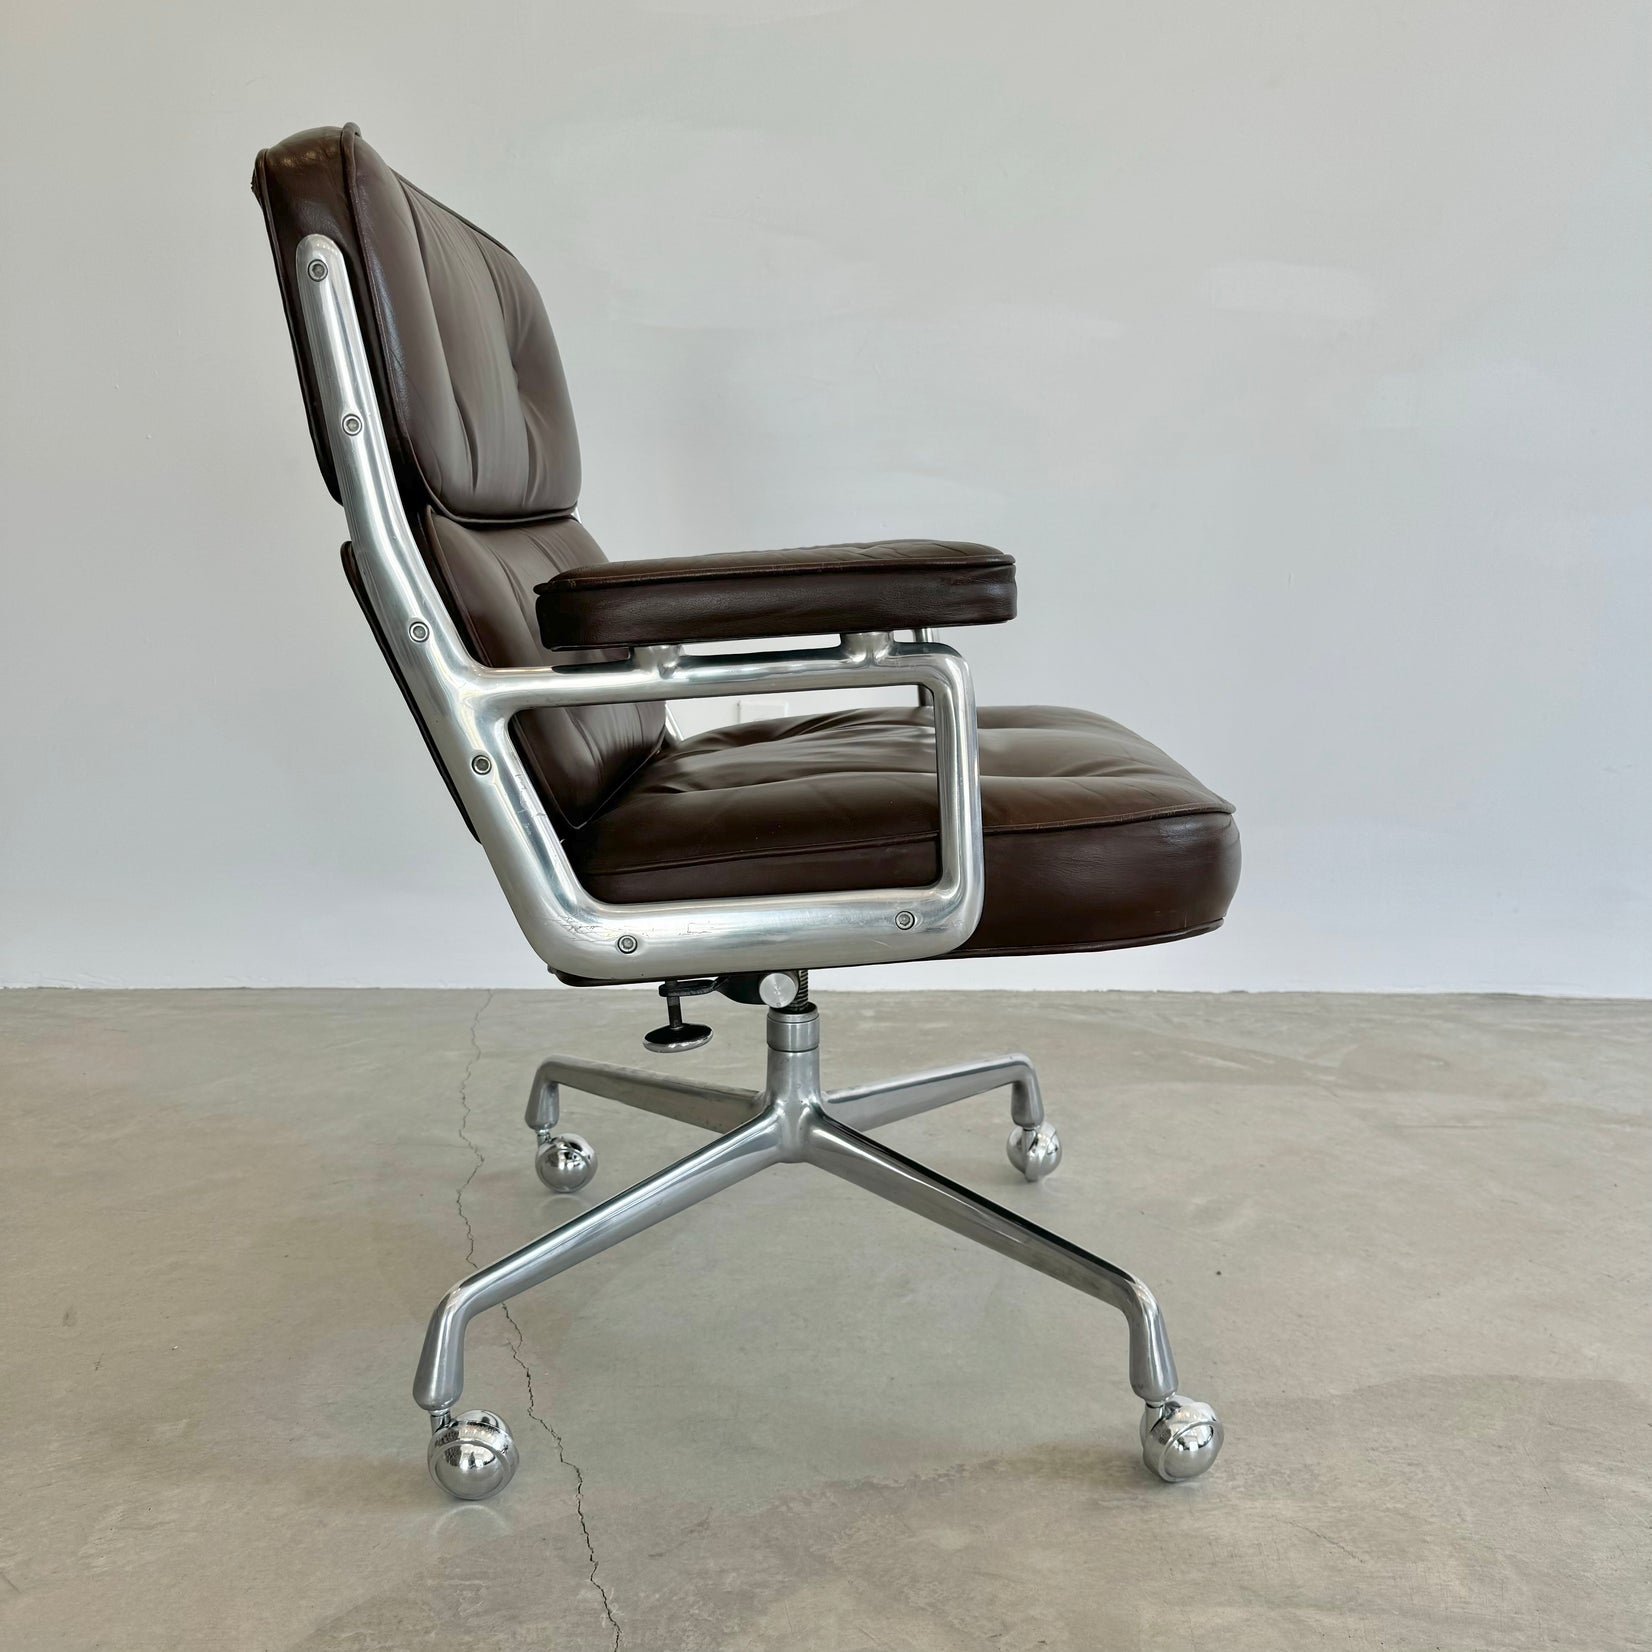 Eames Time Life Chair in Chocolate Leather for Herman Miller, 1978 USA